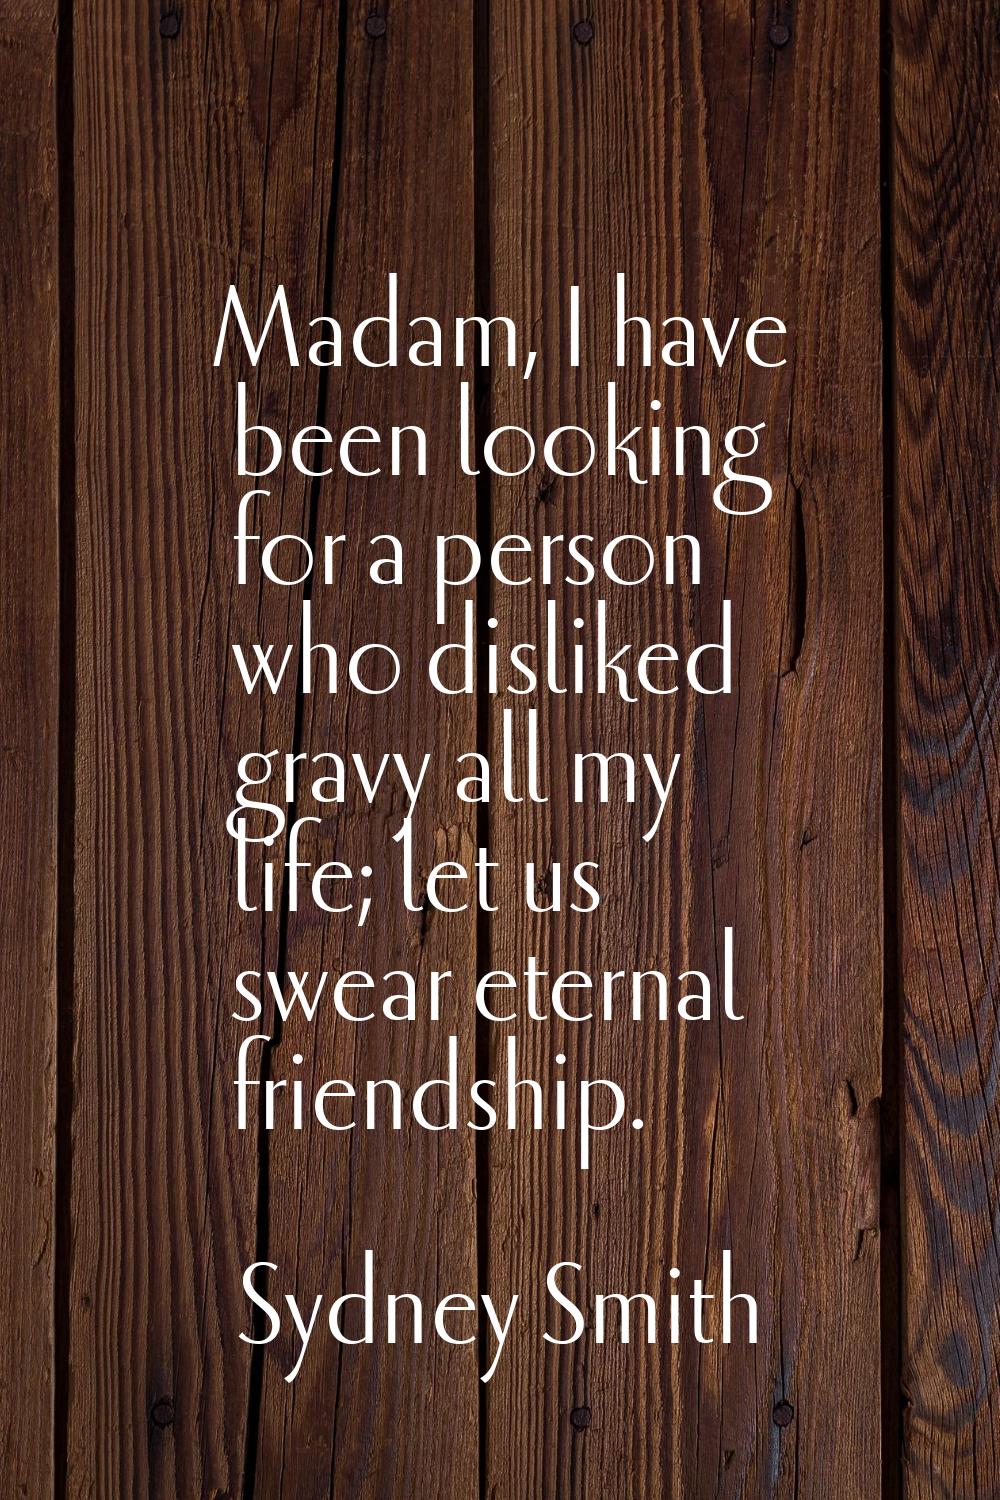 Madam, I have been looking for a person who disliked gravy all my life; let us swear eternal friend